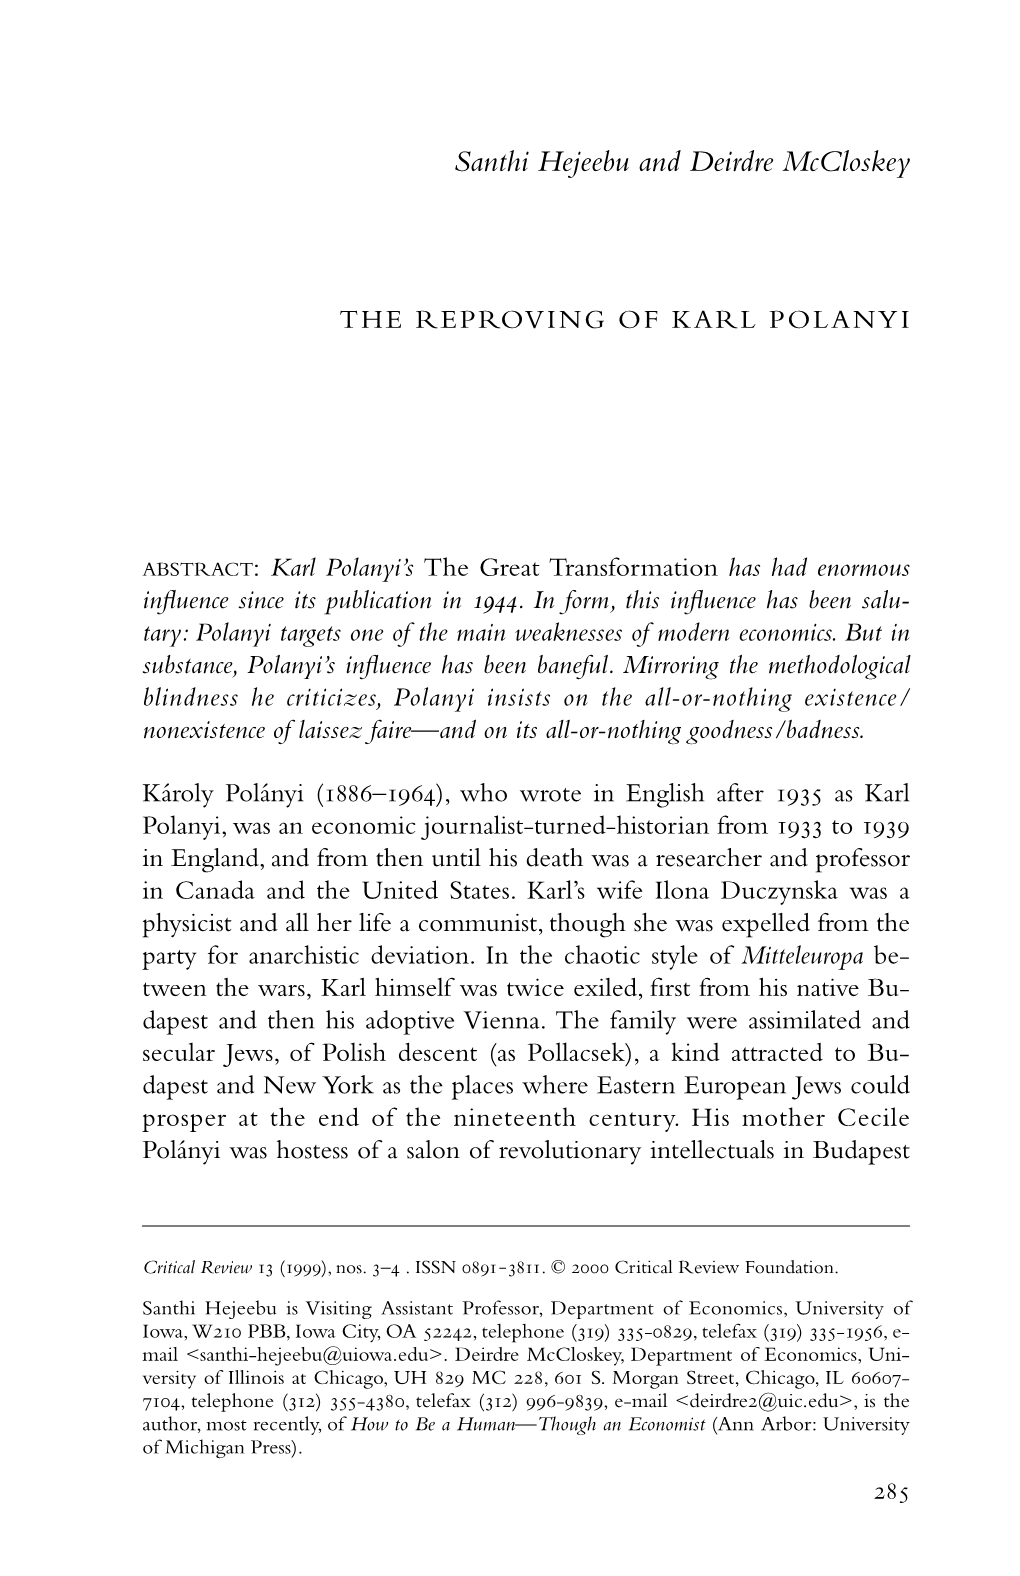 The Reproving of Karl Polanyi